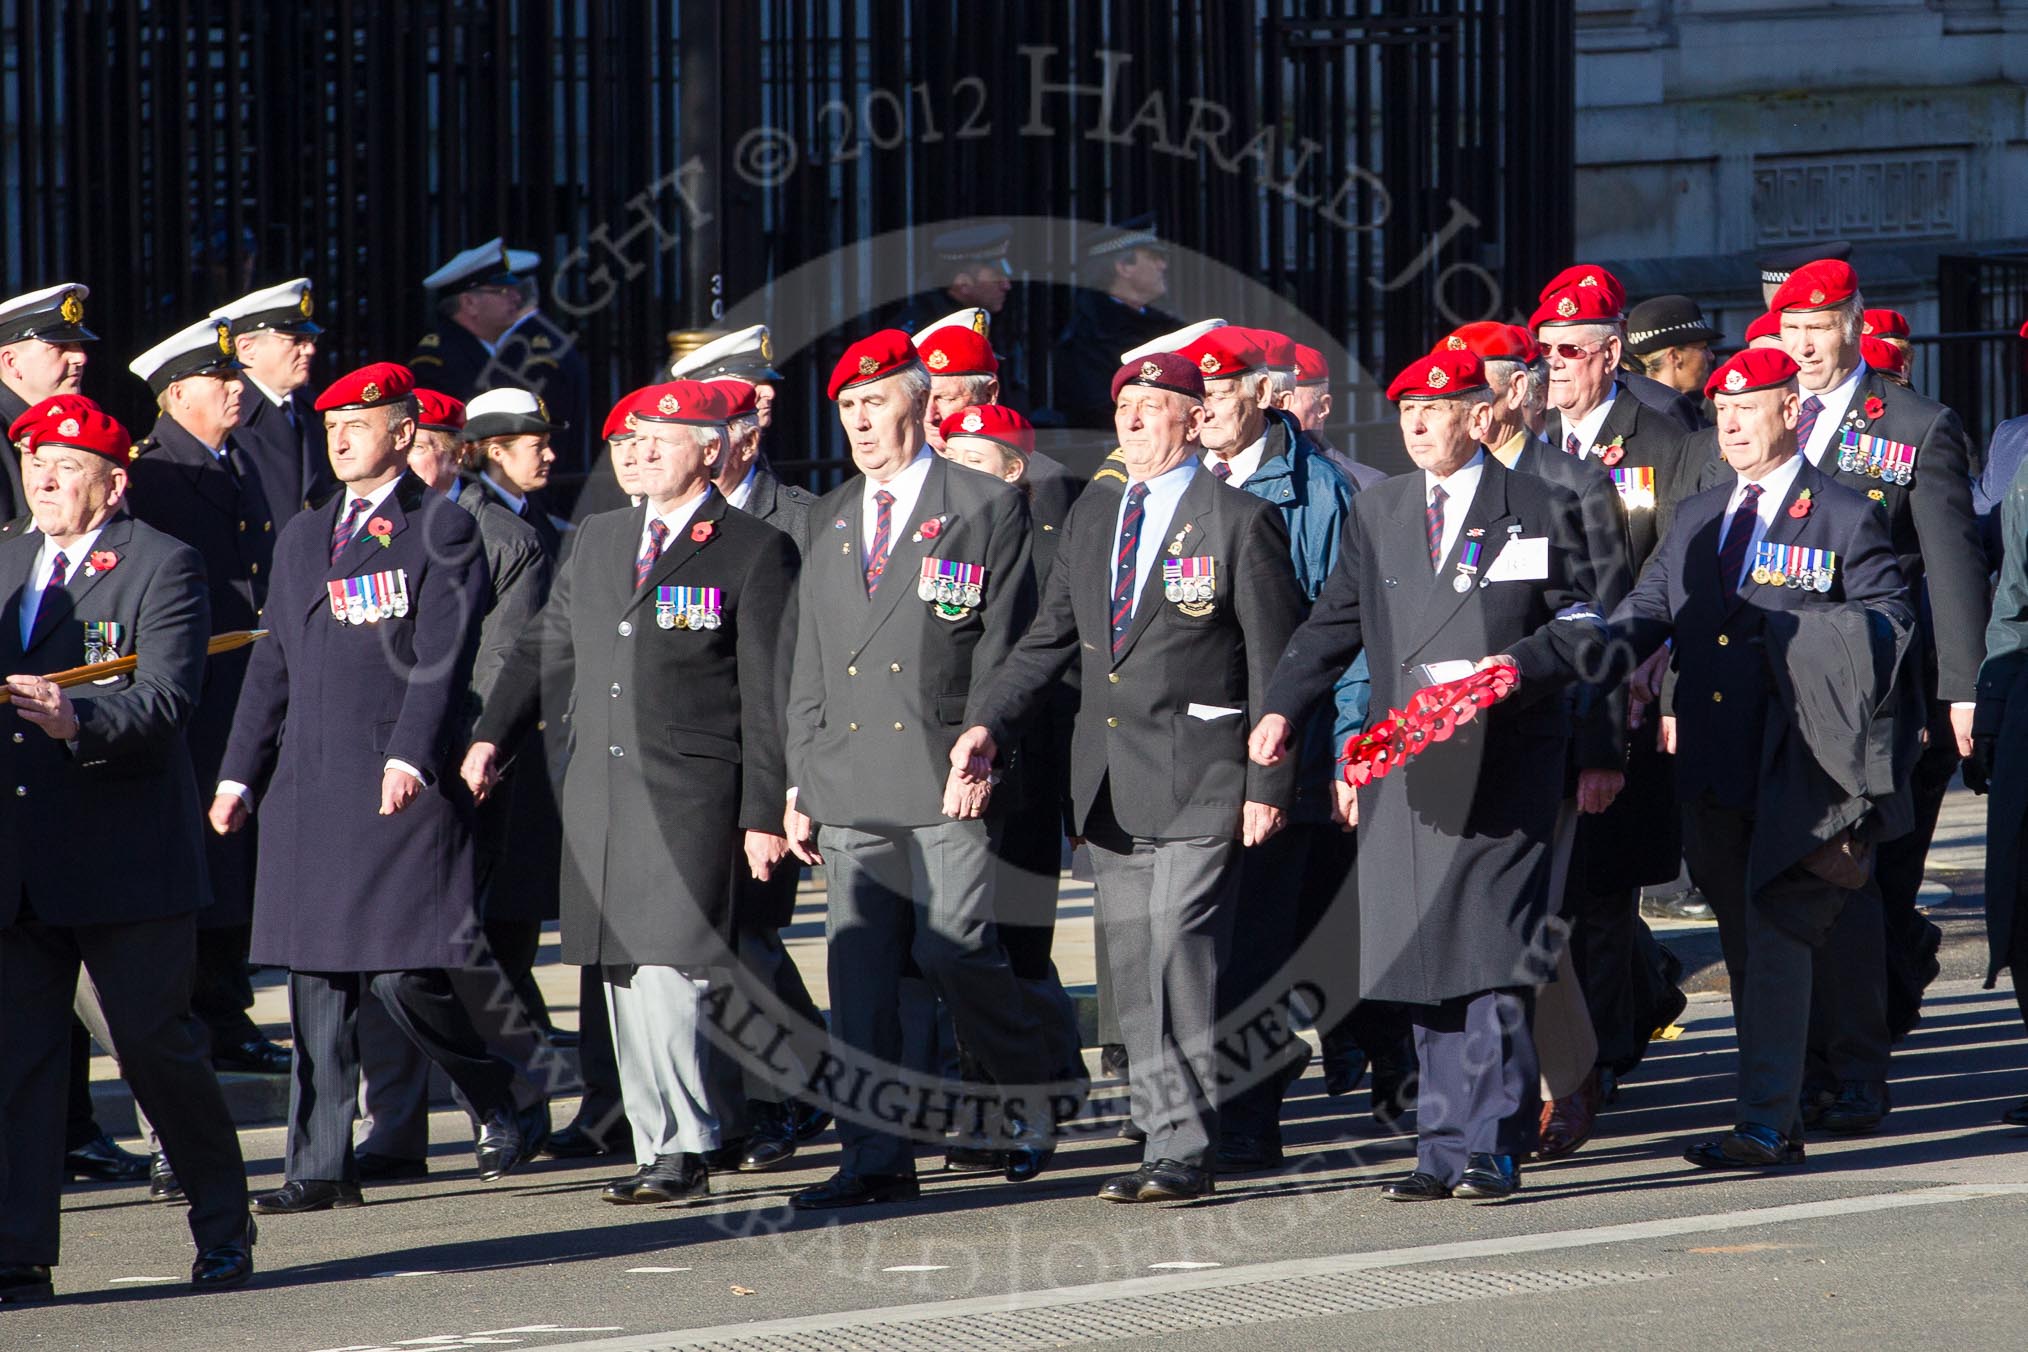 Remembrance Sunday 2012 Cenotaph March Past: Group B3, Royal Military Police Association..
Whitehall, Cenotaph,
London SW1,

United Kingdom,
on 11 November 2012 at 11:55, image #819